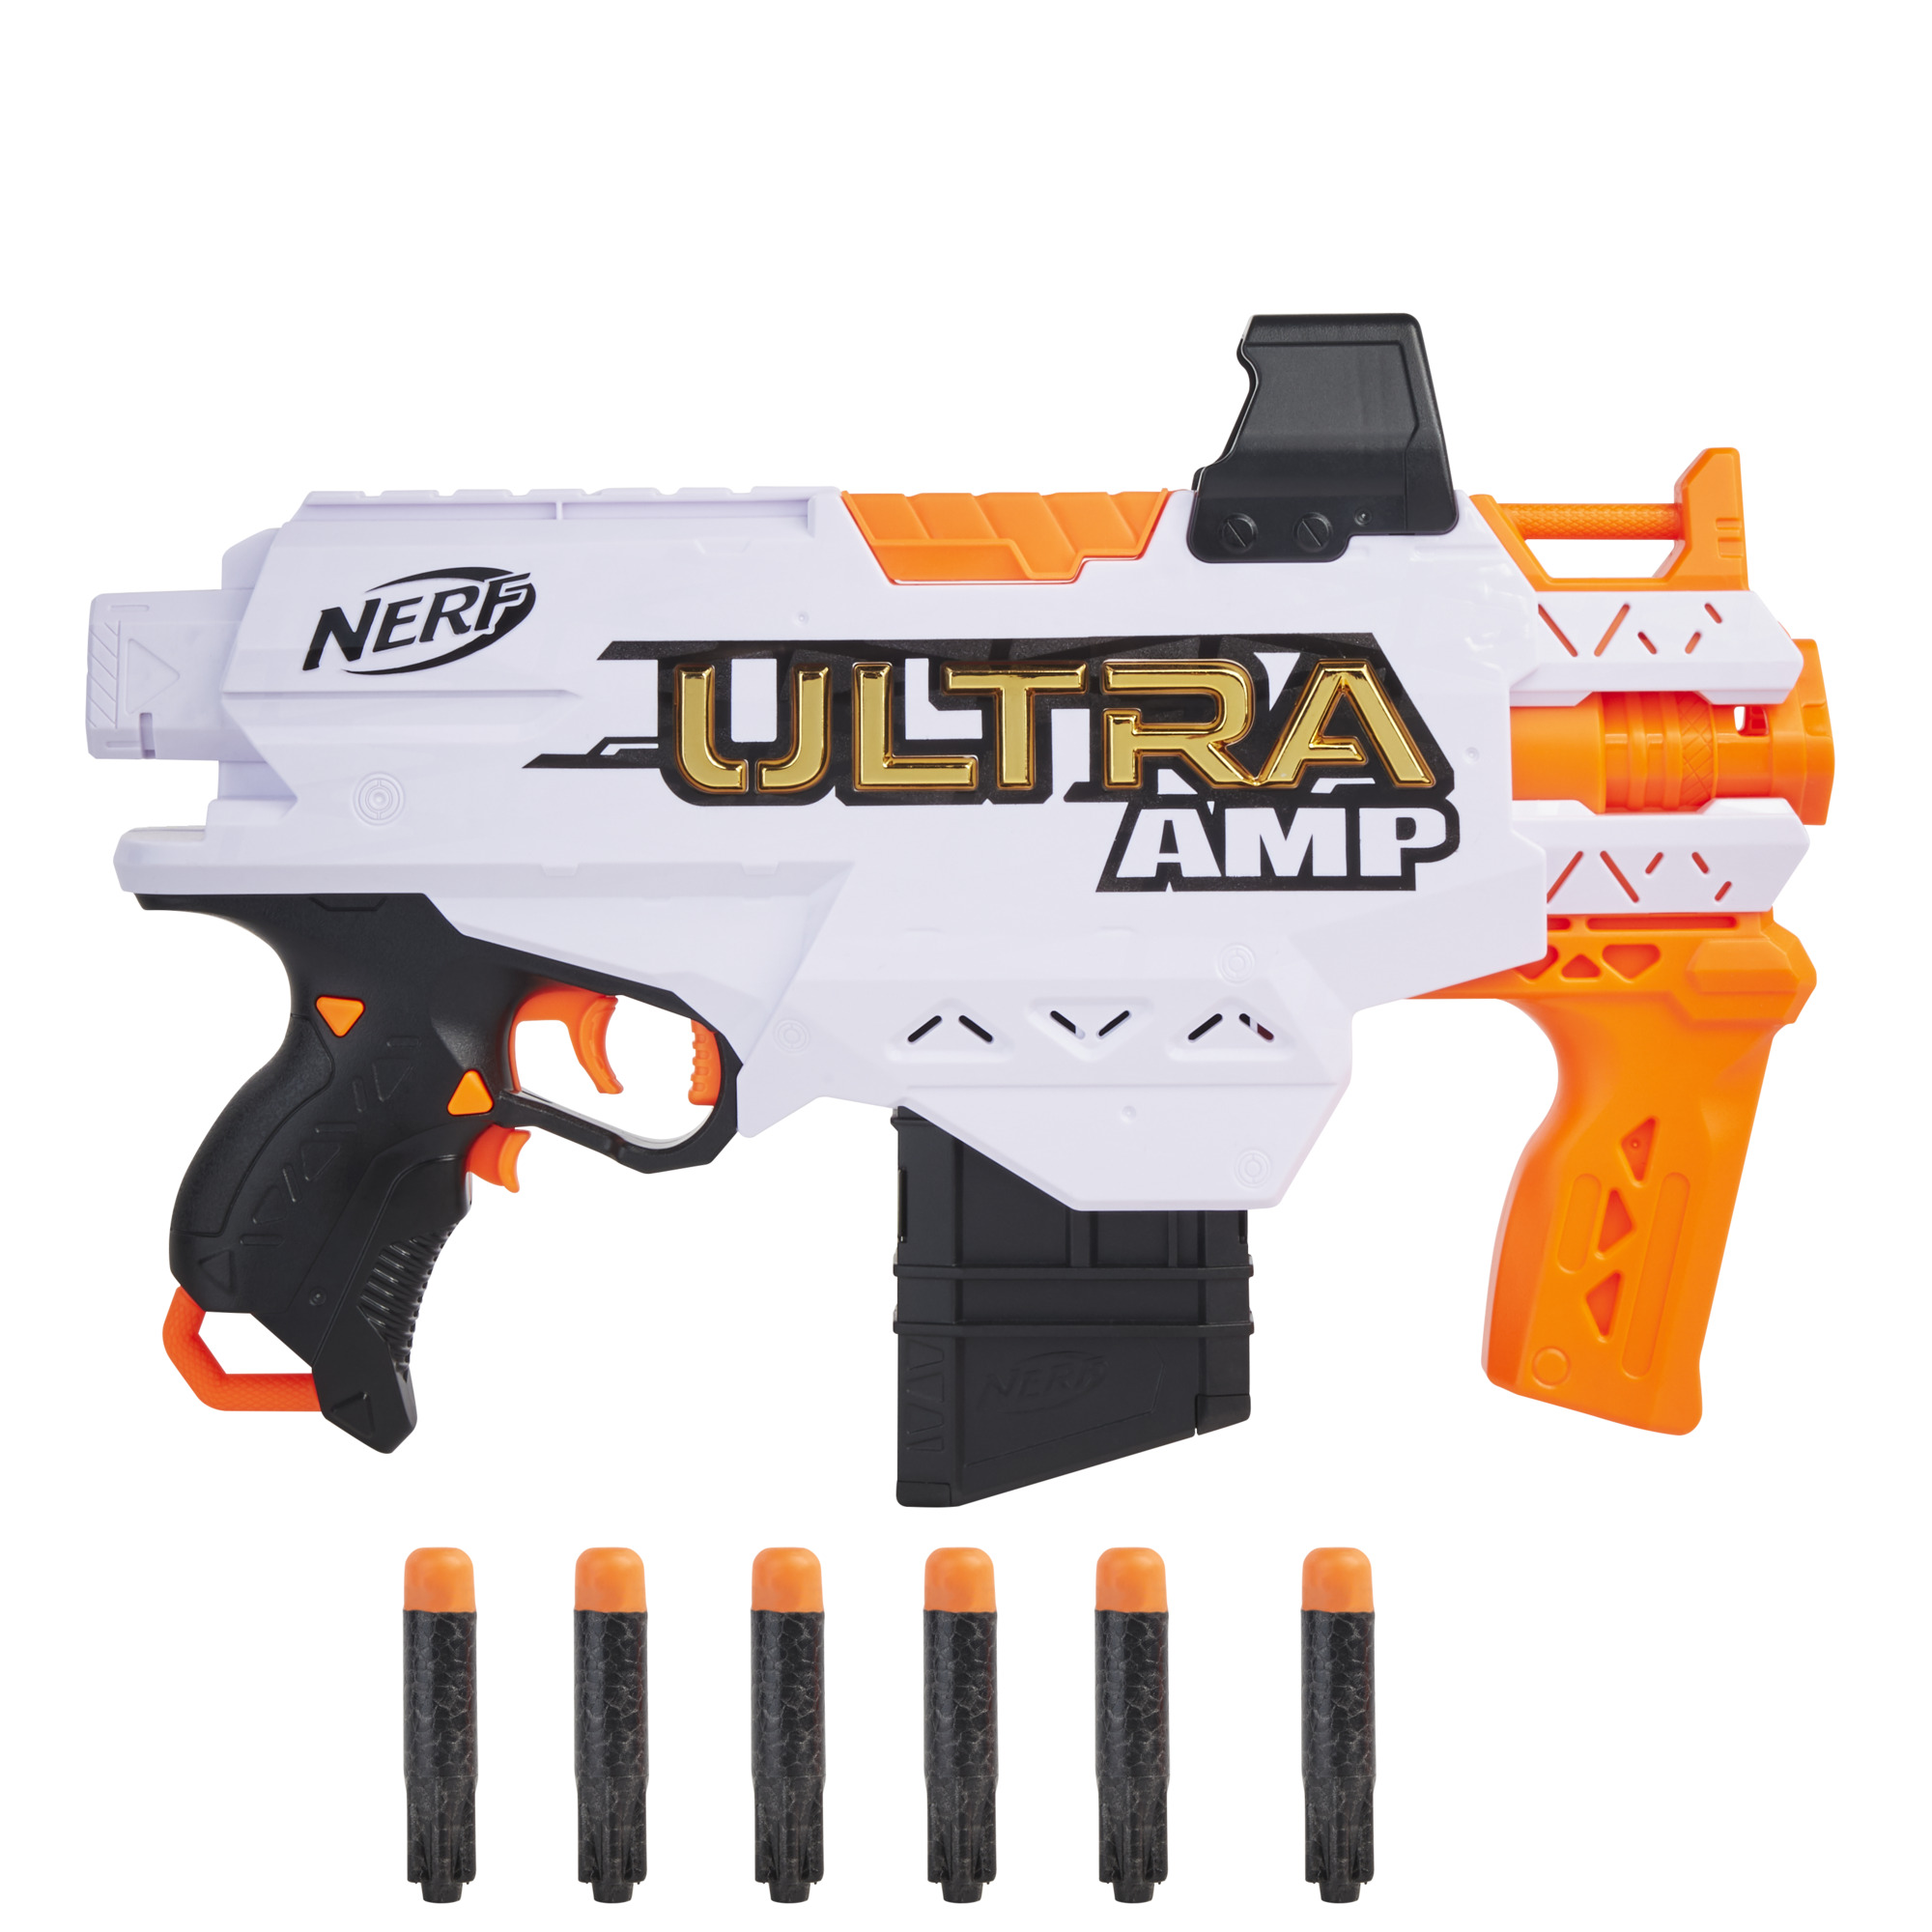 Nerf Ultra Amp Motorized Blaster, 6-Dart Clip, 6 Darts, Compatible Only with Nerf Ultra Darts - image 5 of 10